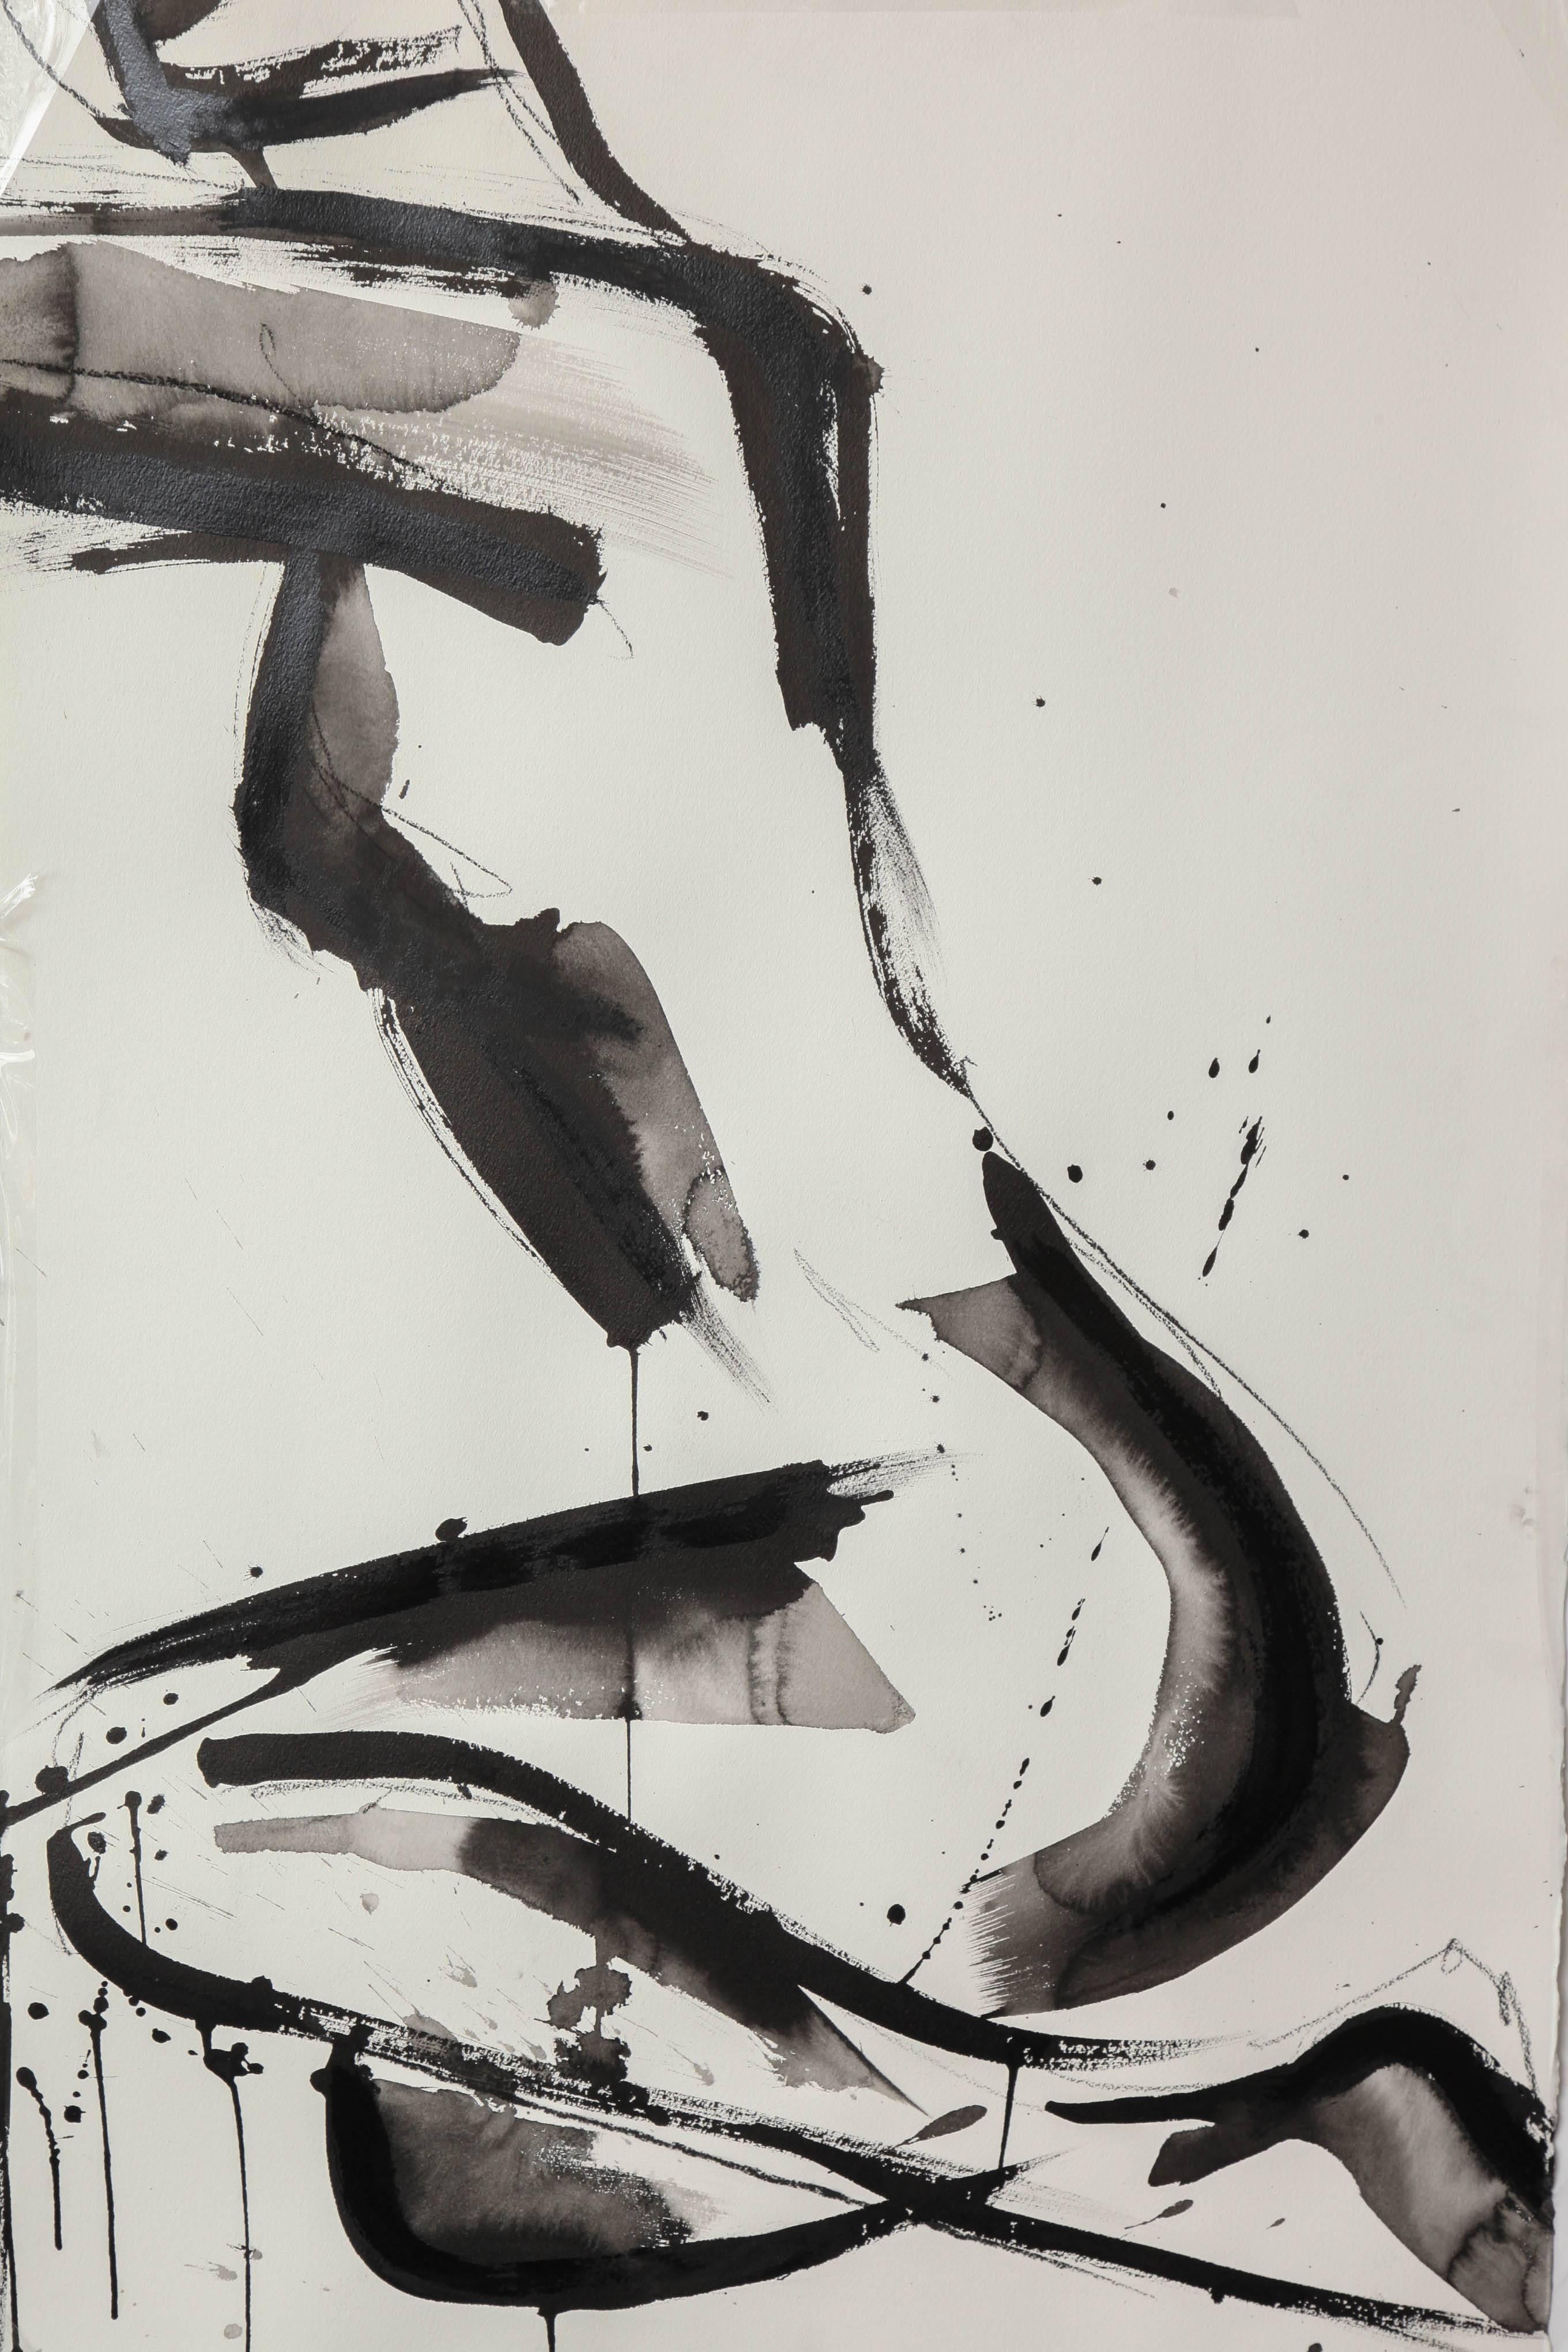 Beautiful nude painting by Jenna Snyder-Phillips.
Sumi ink, charcoal and lacquer, 100% archival cotton paper.
Artist is educated in Italy and USA.